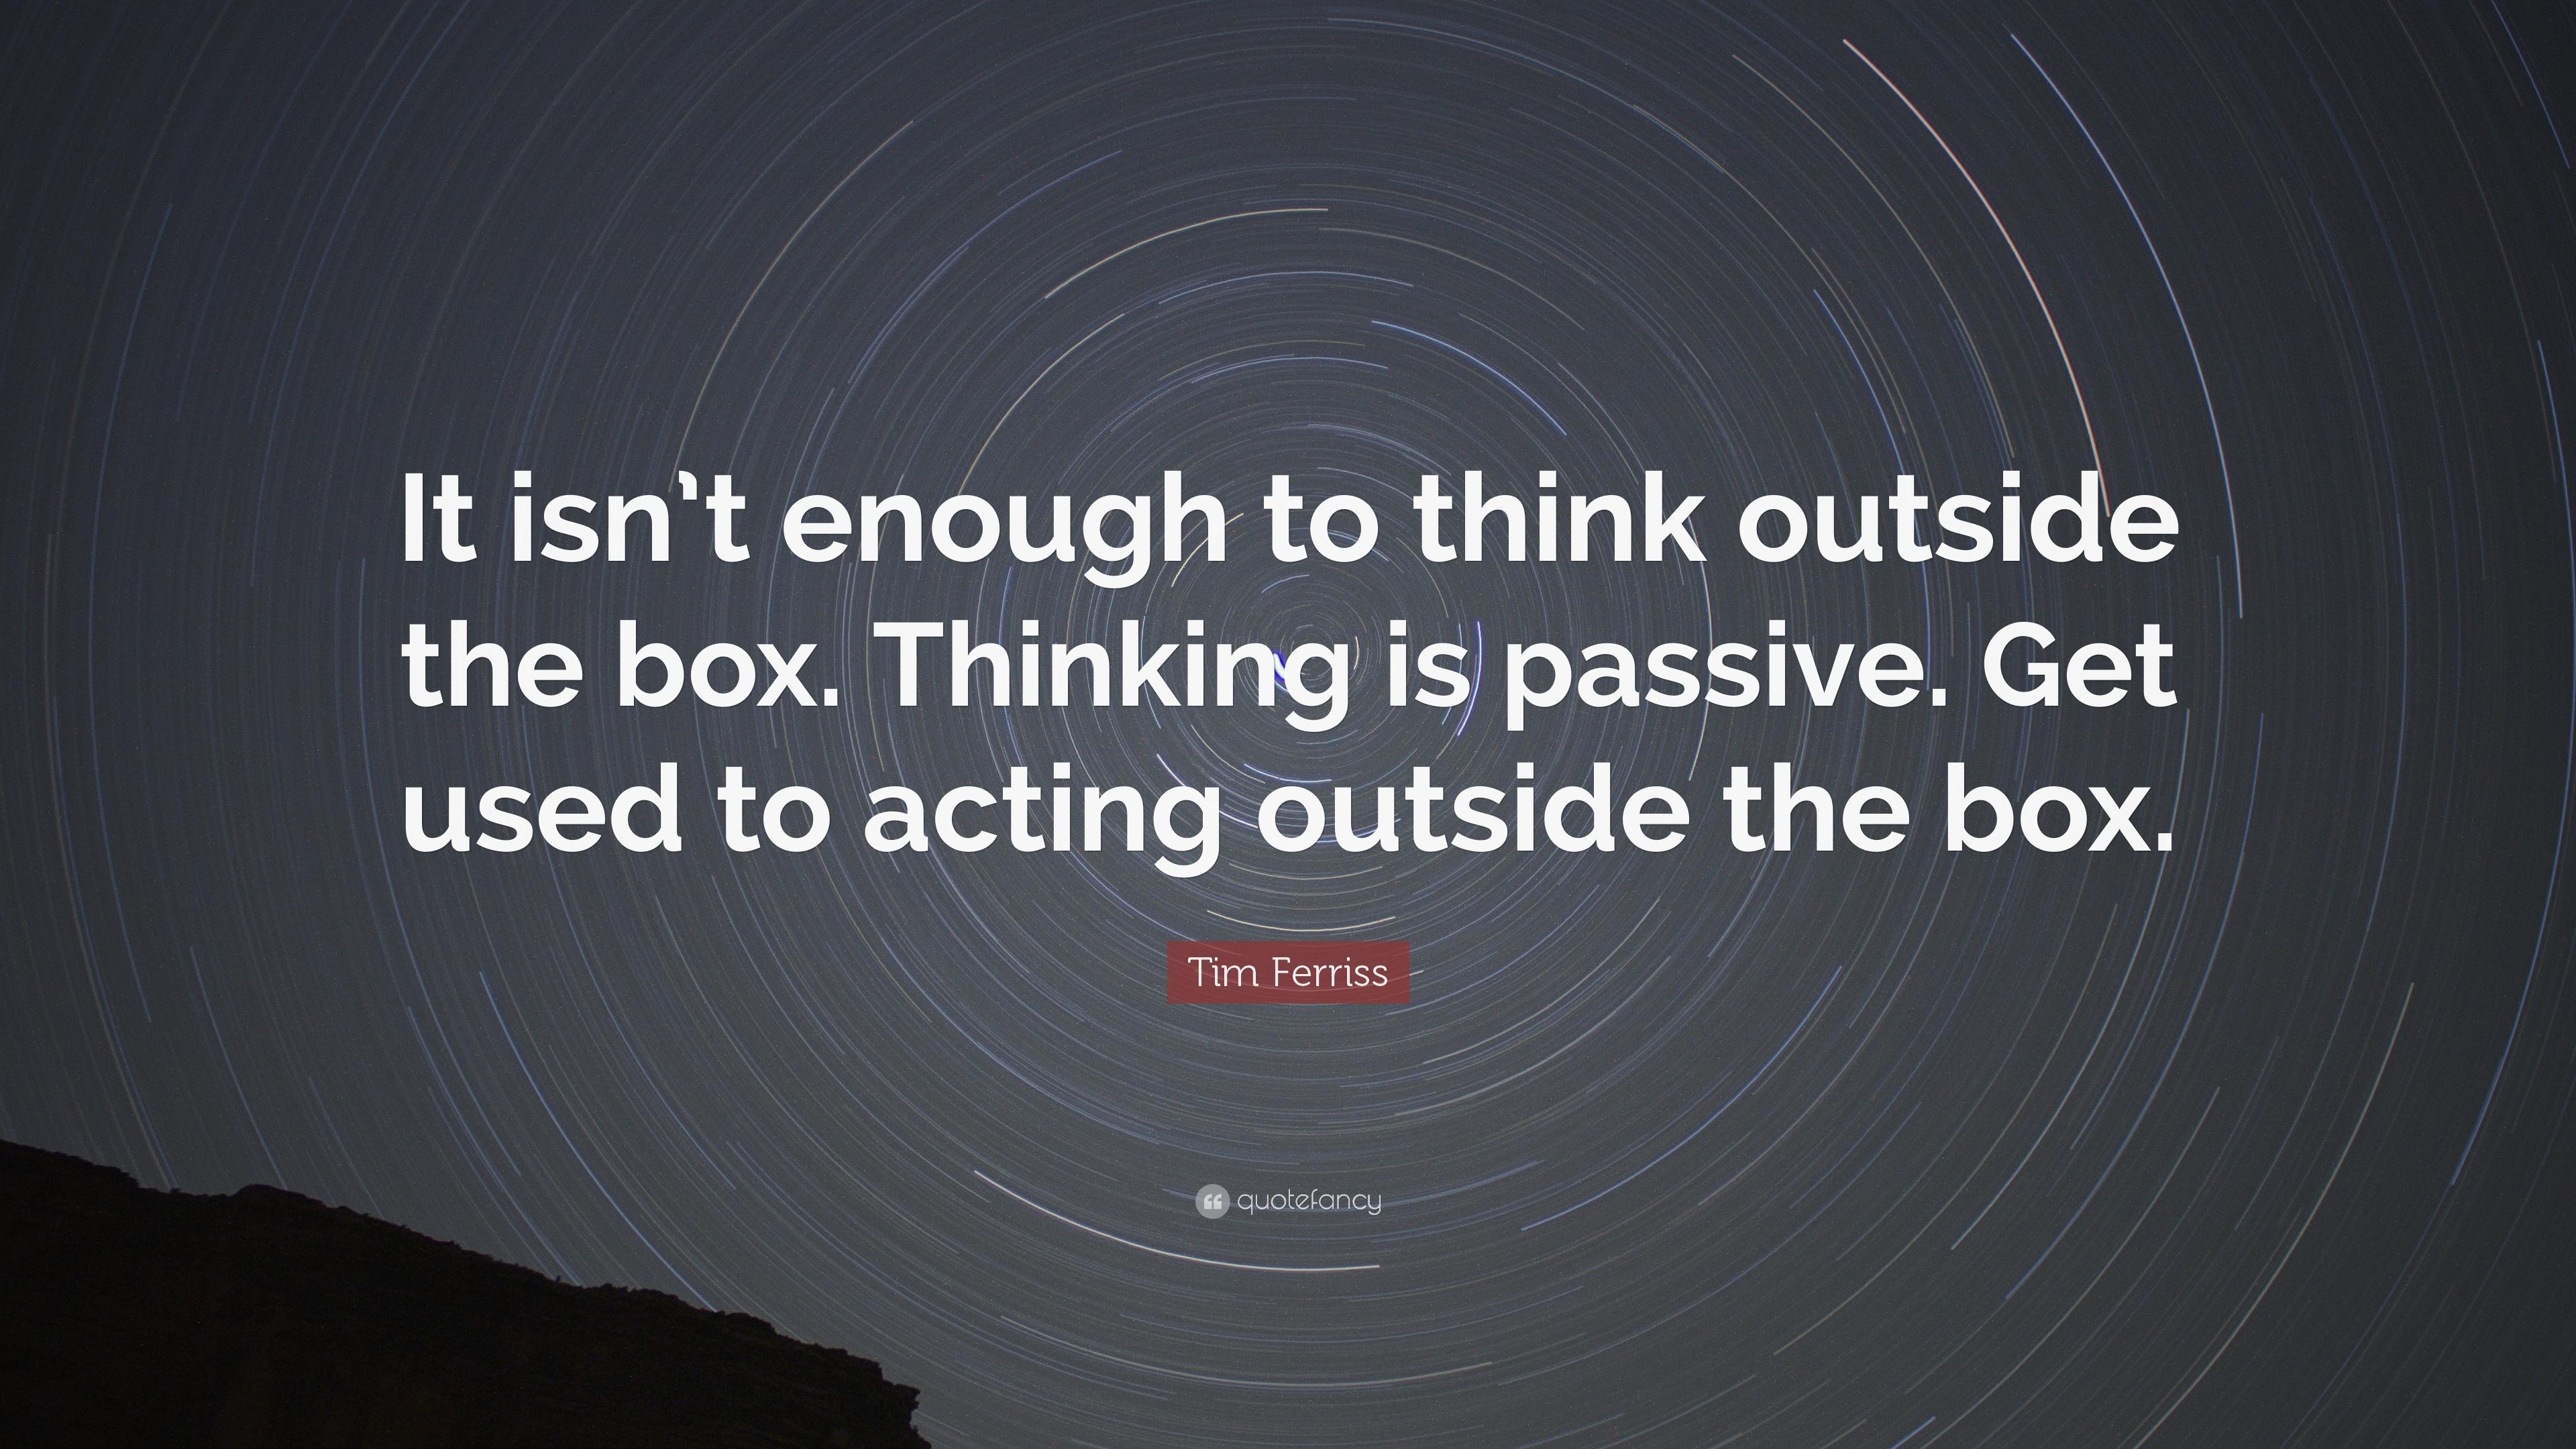 Tim Ferriss Quote: “It isn't enough to think outside the box